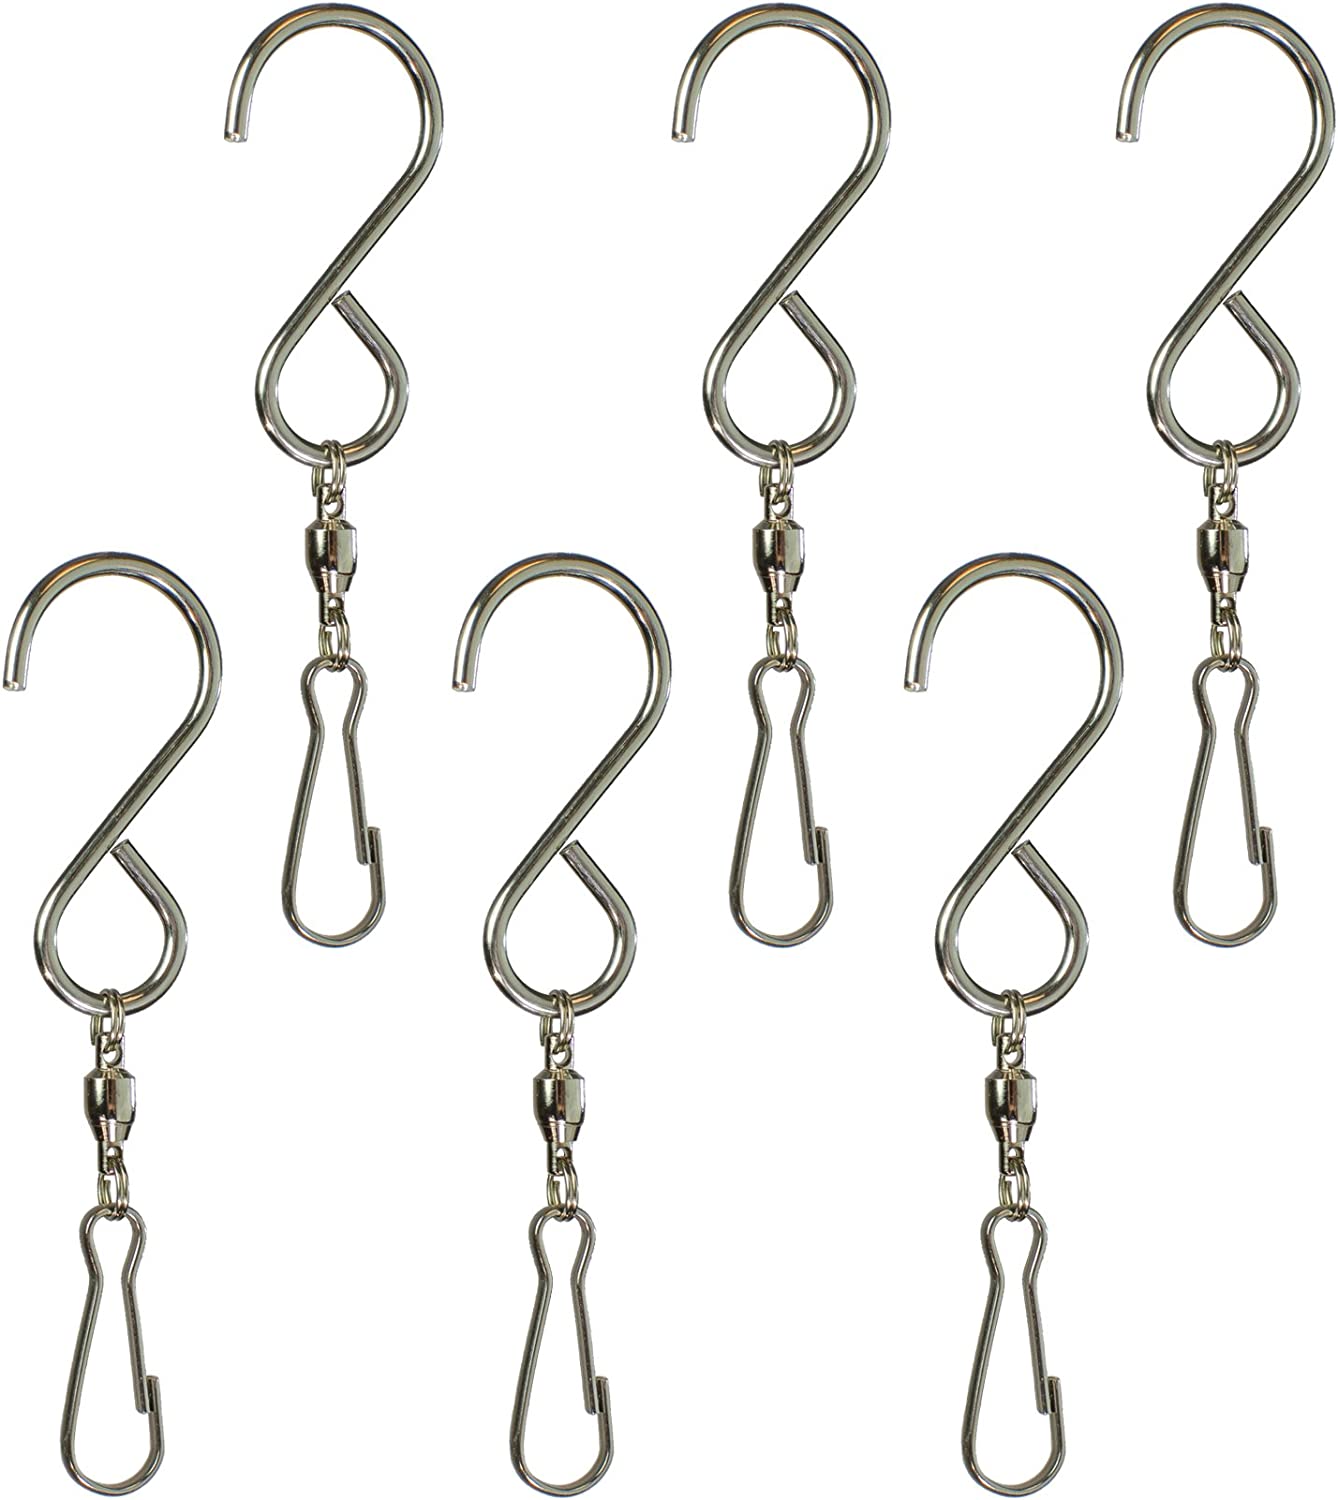 In the Breeze Stainless Steel Hang-It S Hooks with Ball Bearing Swivel - 6  PC - Smooth Spinning Swivel Hook Clip for Hanging décor